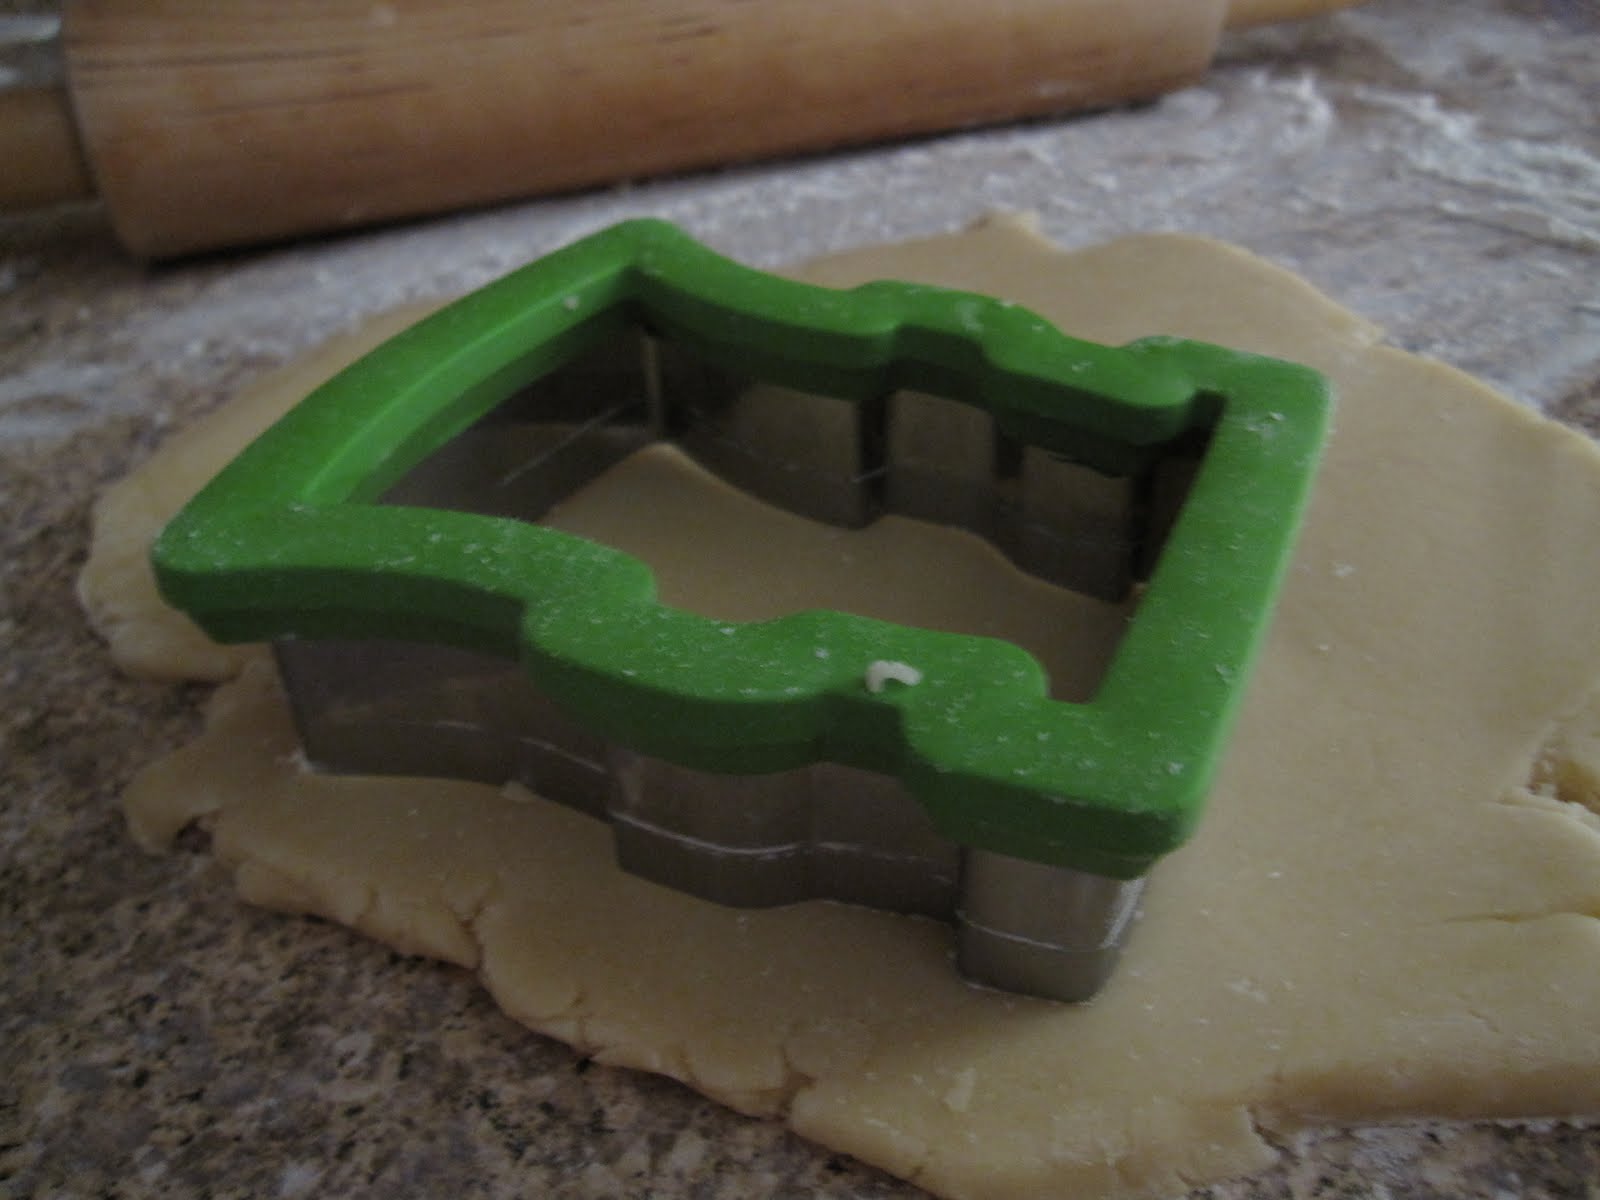 Frankenstein cookie cutter on rolled-out dough